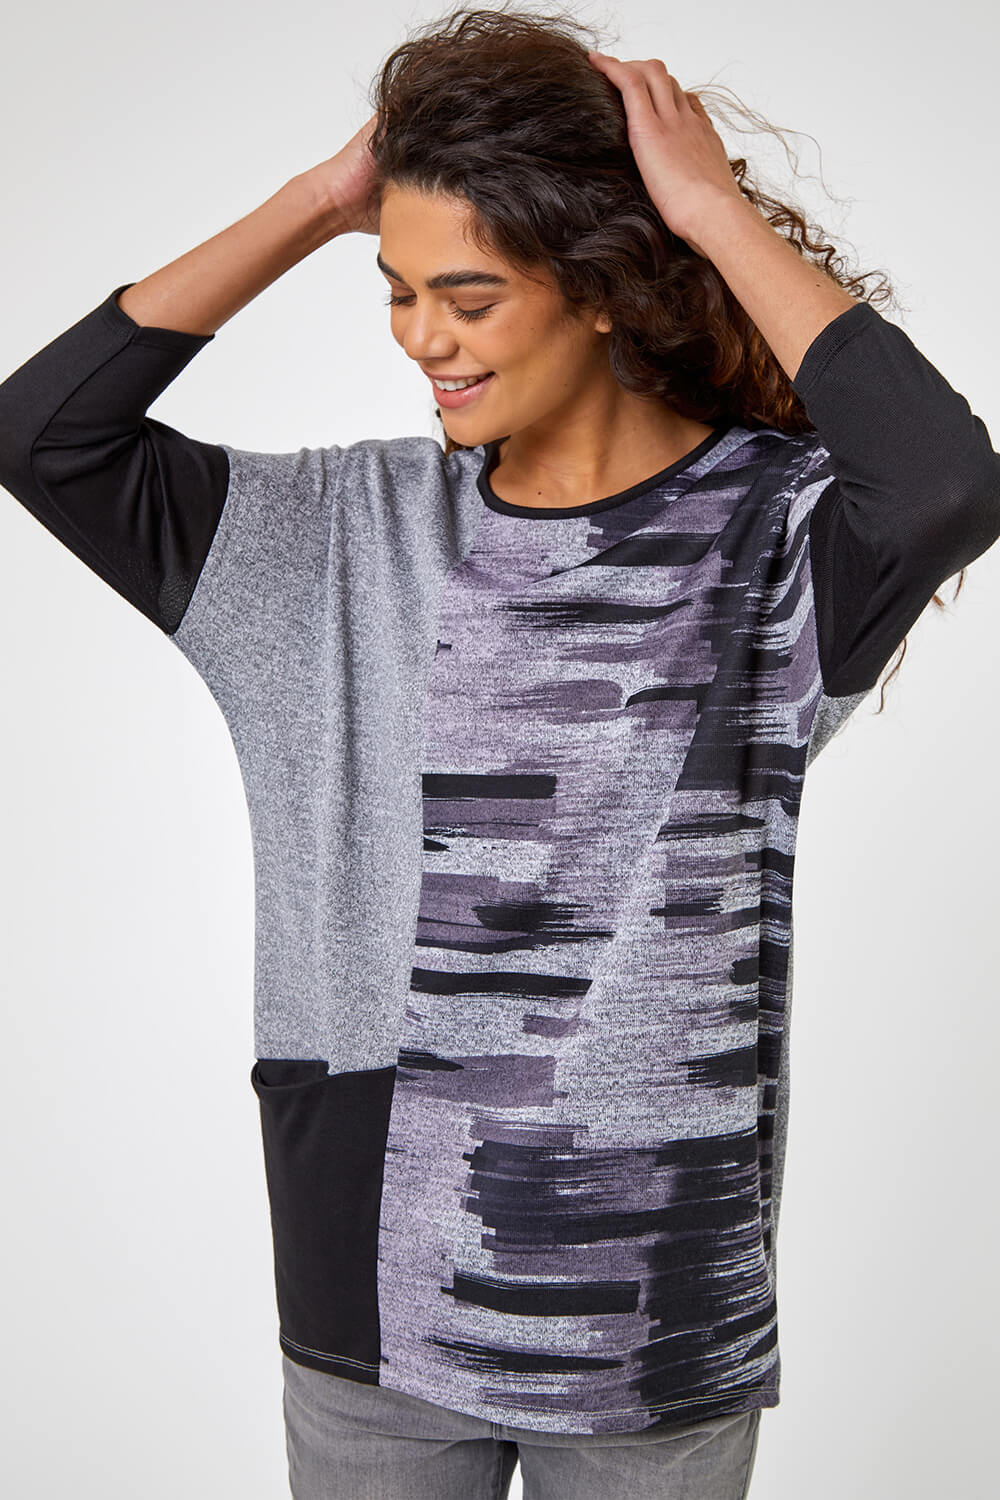 Grey Colour Block Graphic Print Tunic Top, Image 4 of 5